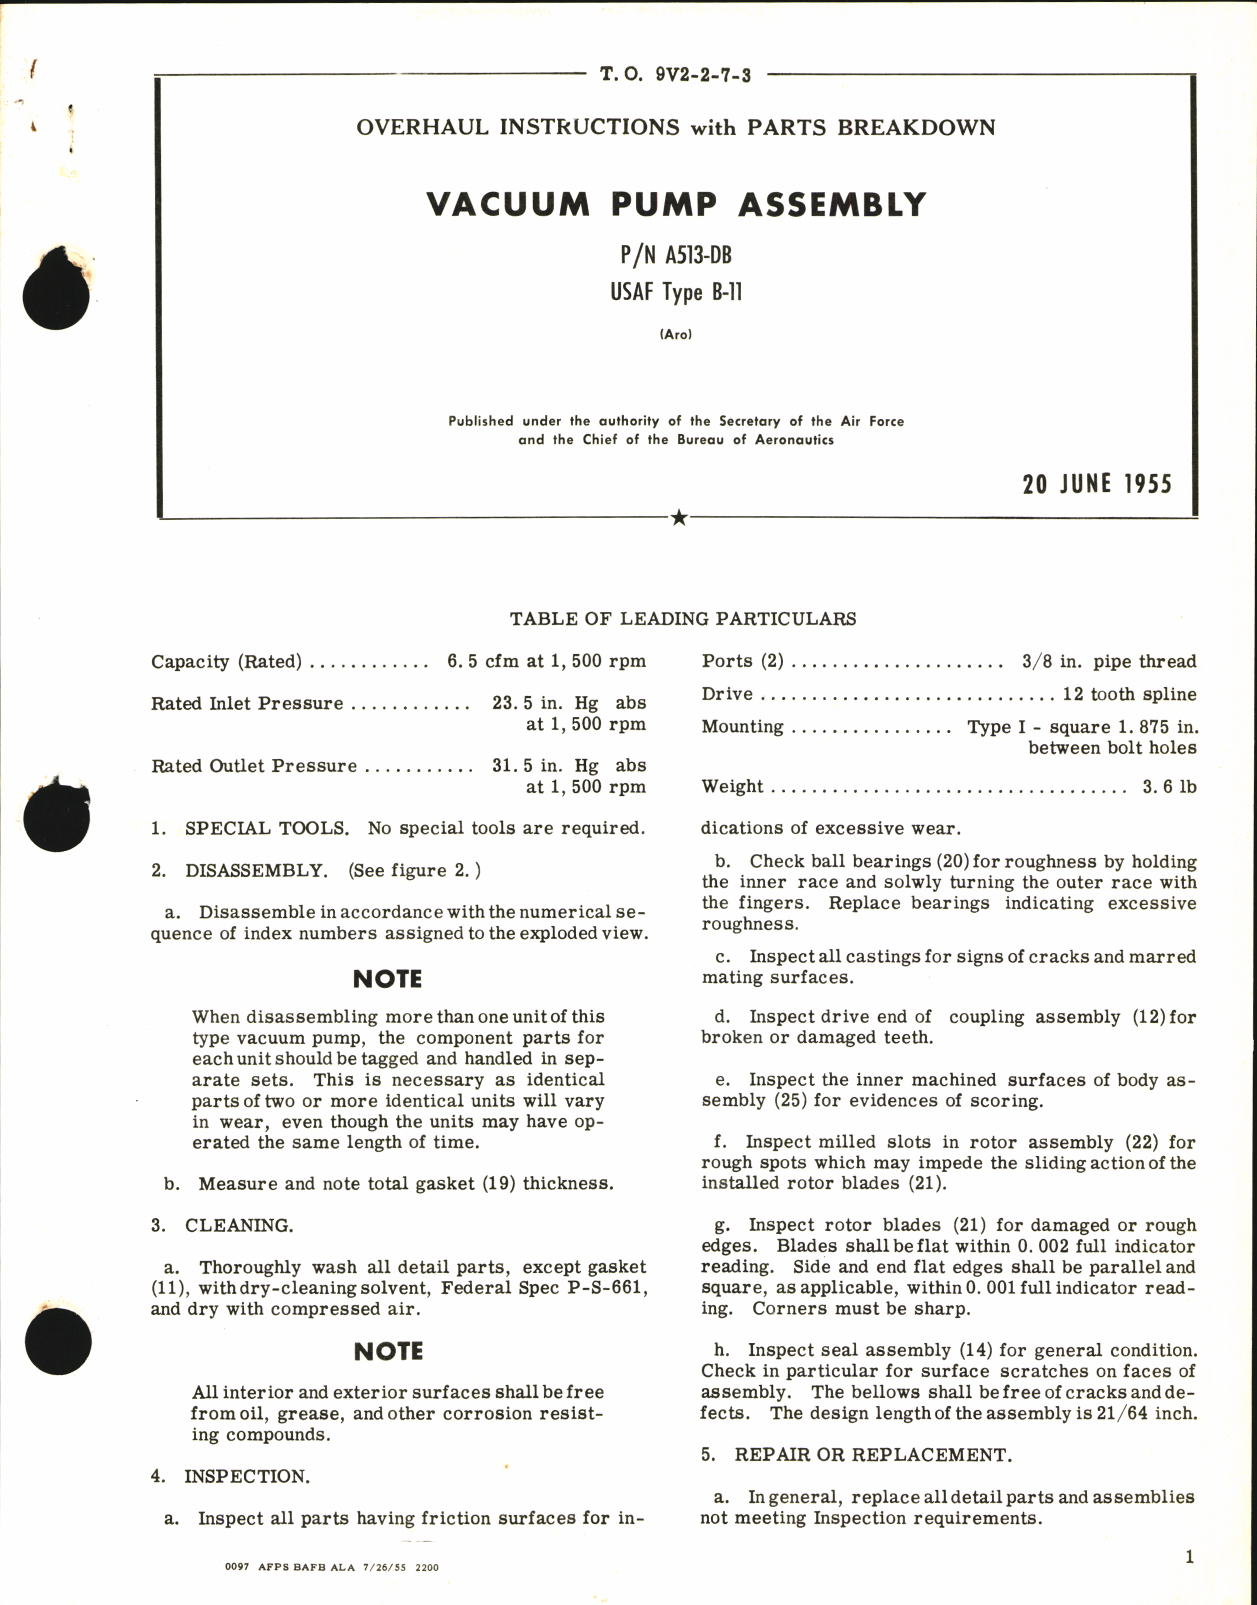 Sample page 1 from AirCorps Library document: Overhaul Instructions with Parts Breakdown for Vacuum Pump Assembly Part no. A513-DB USAF Type B-11